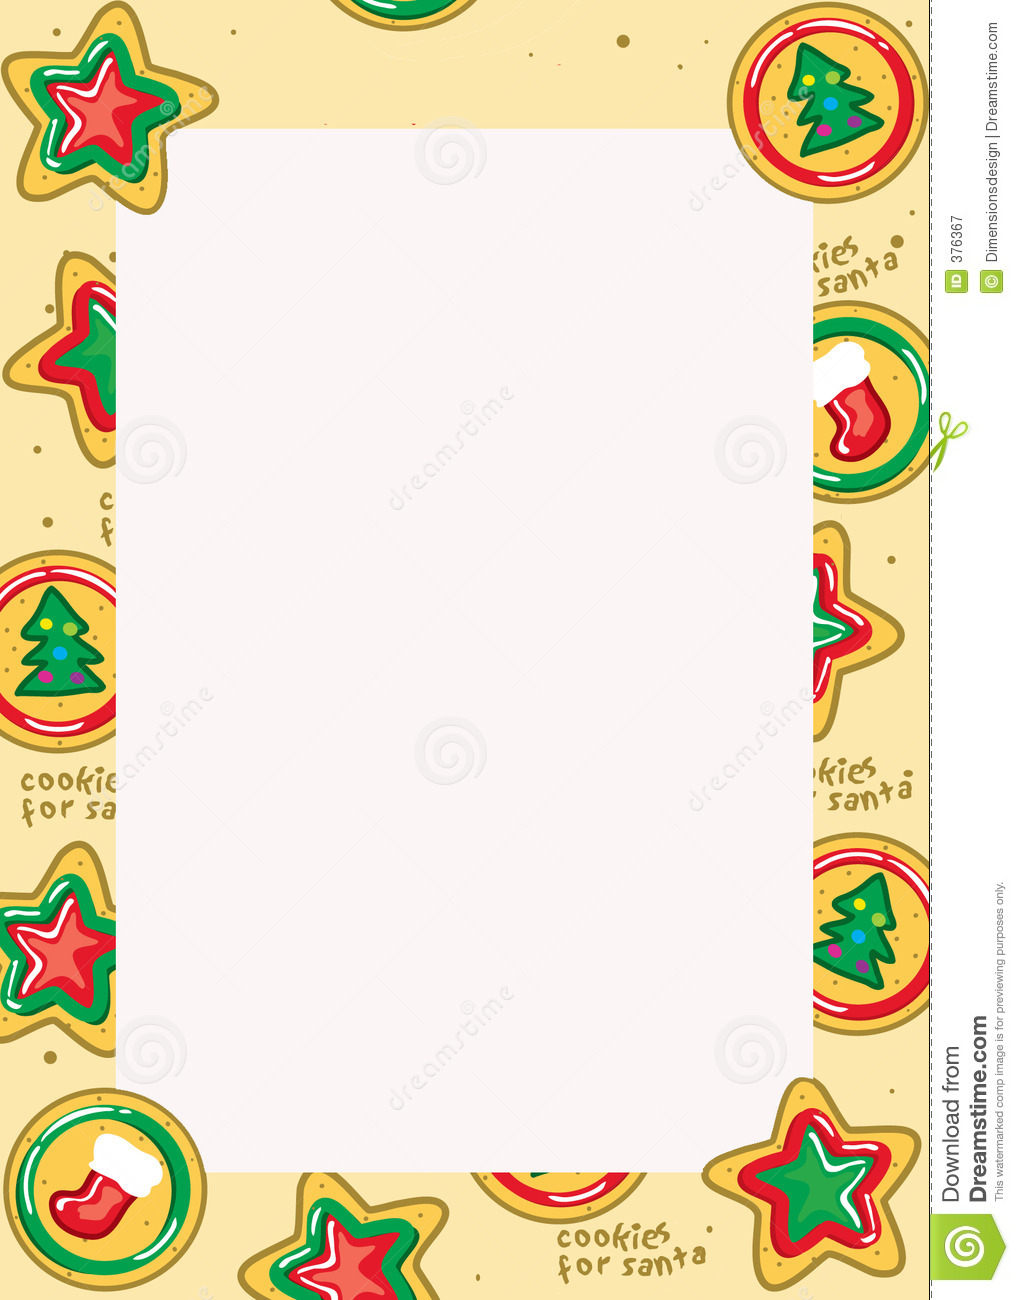 Christmas Cookie Border Royalty Free Stock Photography   Image  376367